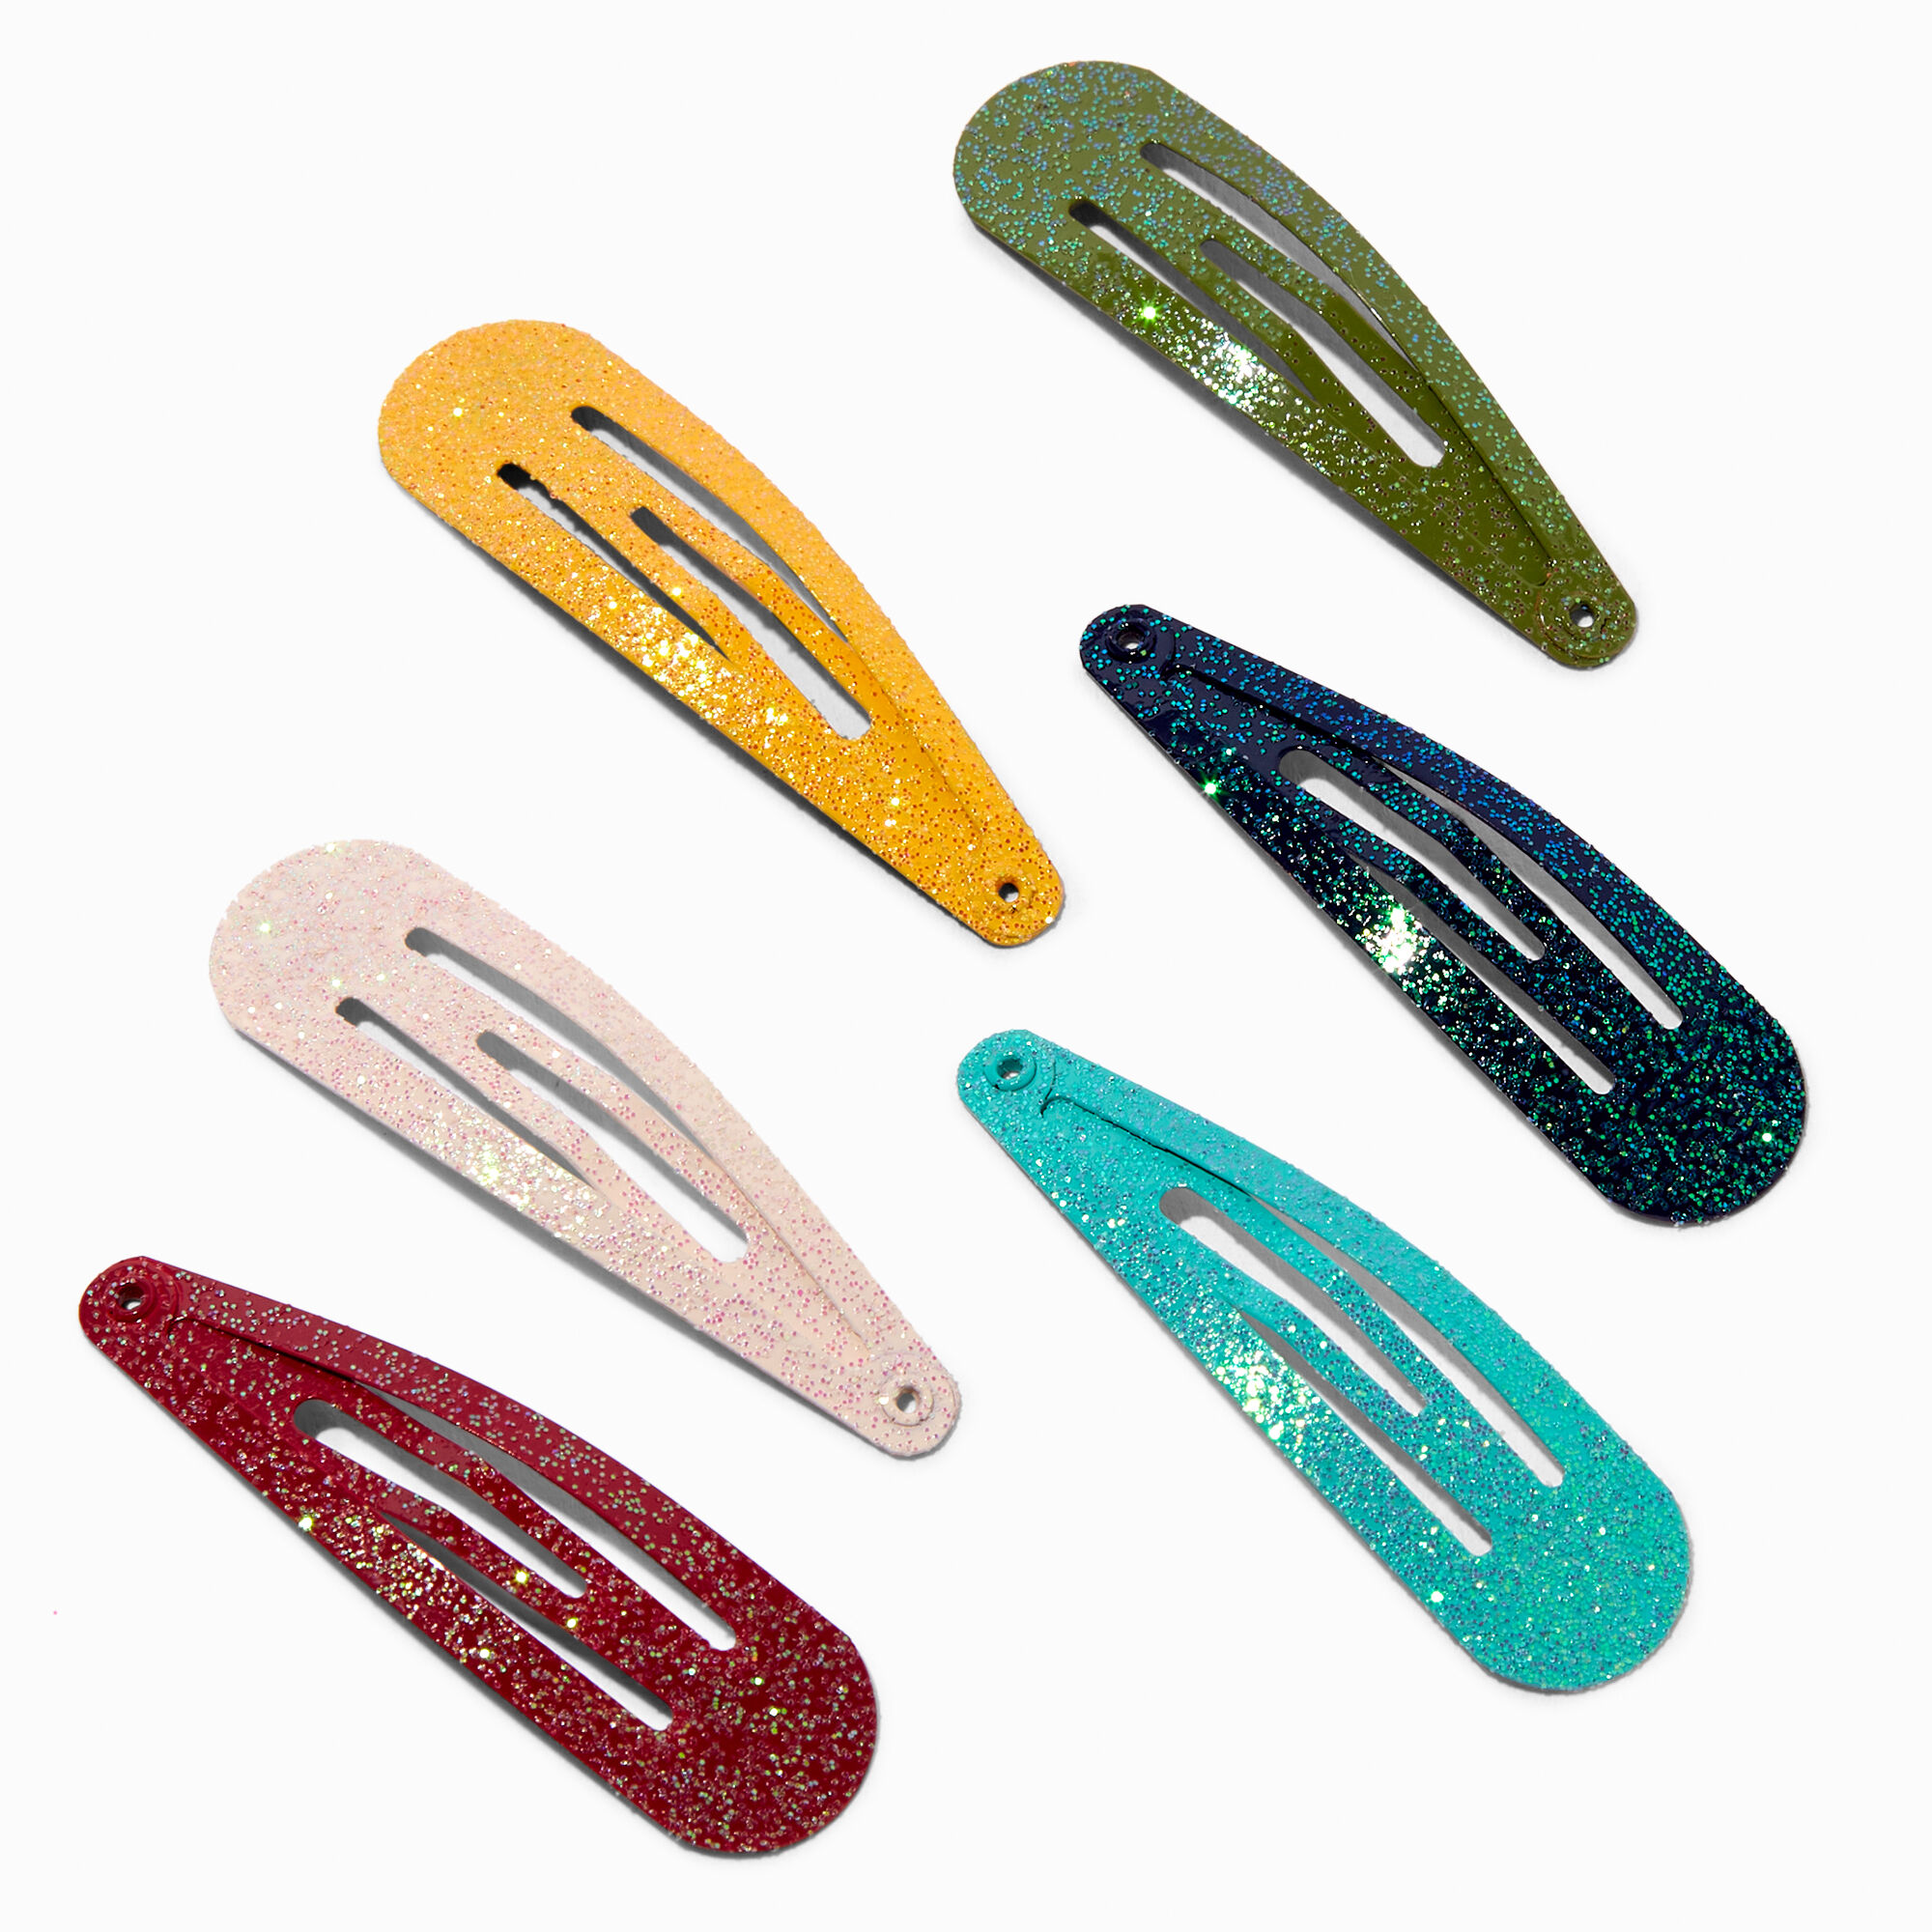 View Claires Club Jewel Tone Glitter Snap Hair Clips 6 Pack information